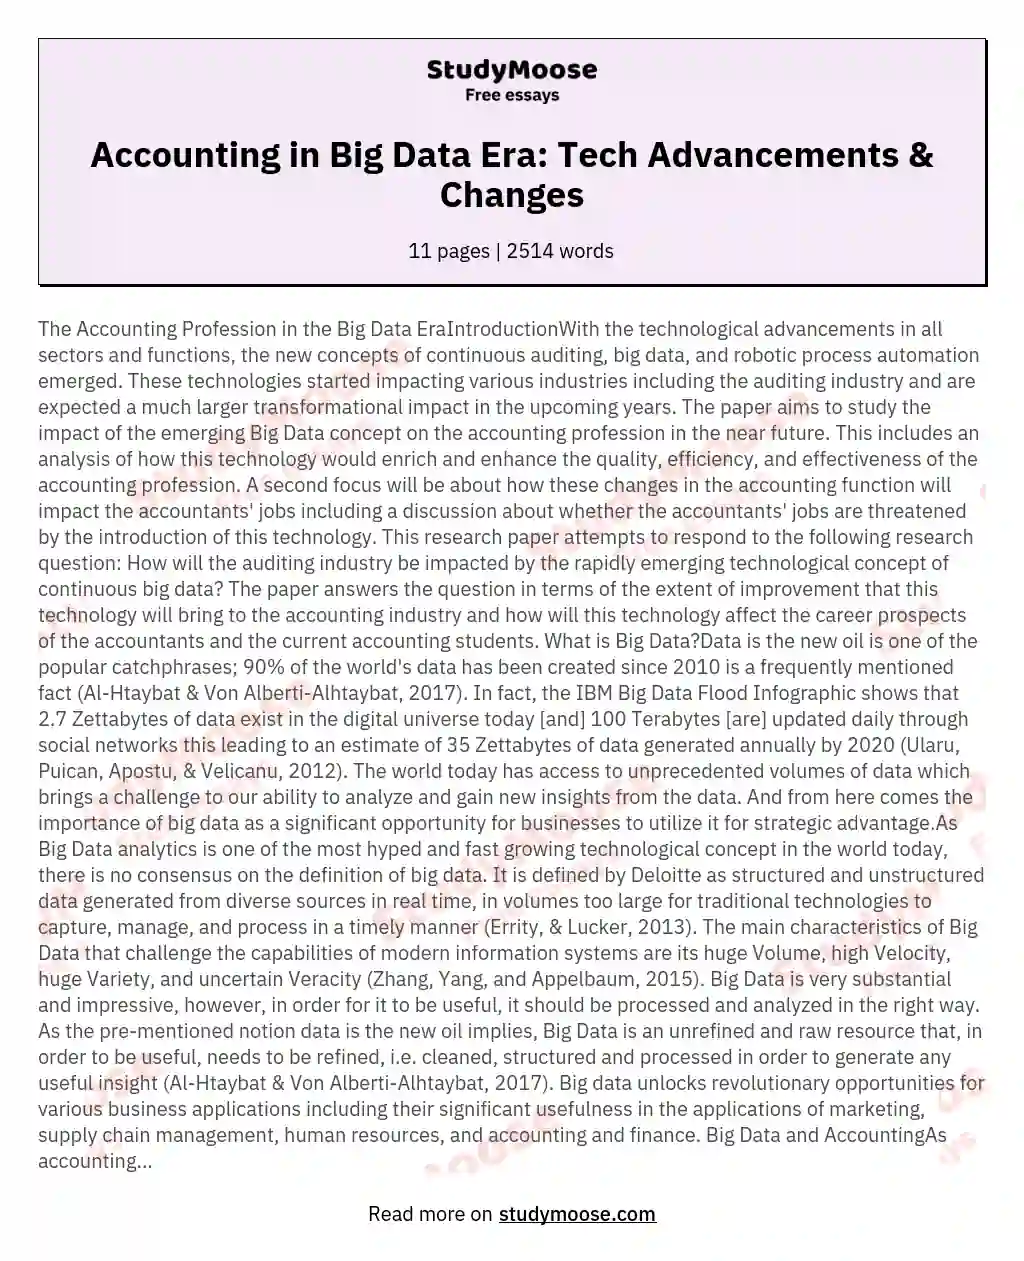 Accounting in Big Data Era: Tech Advancements & Changes